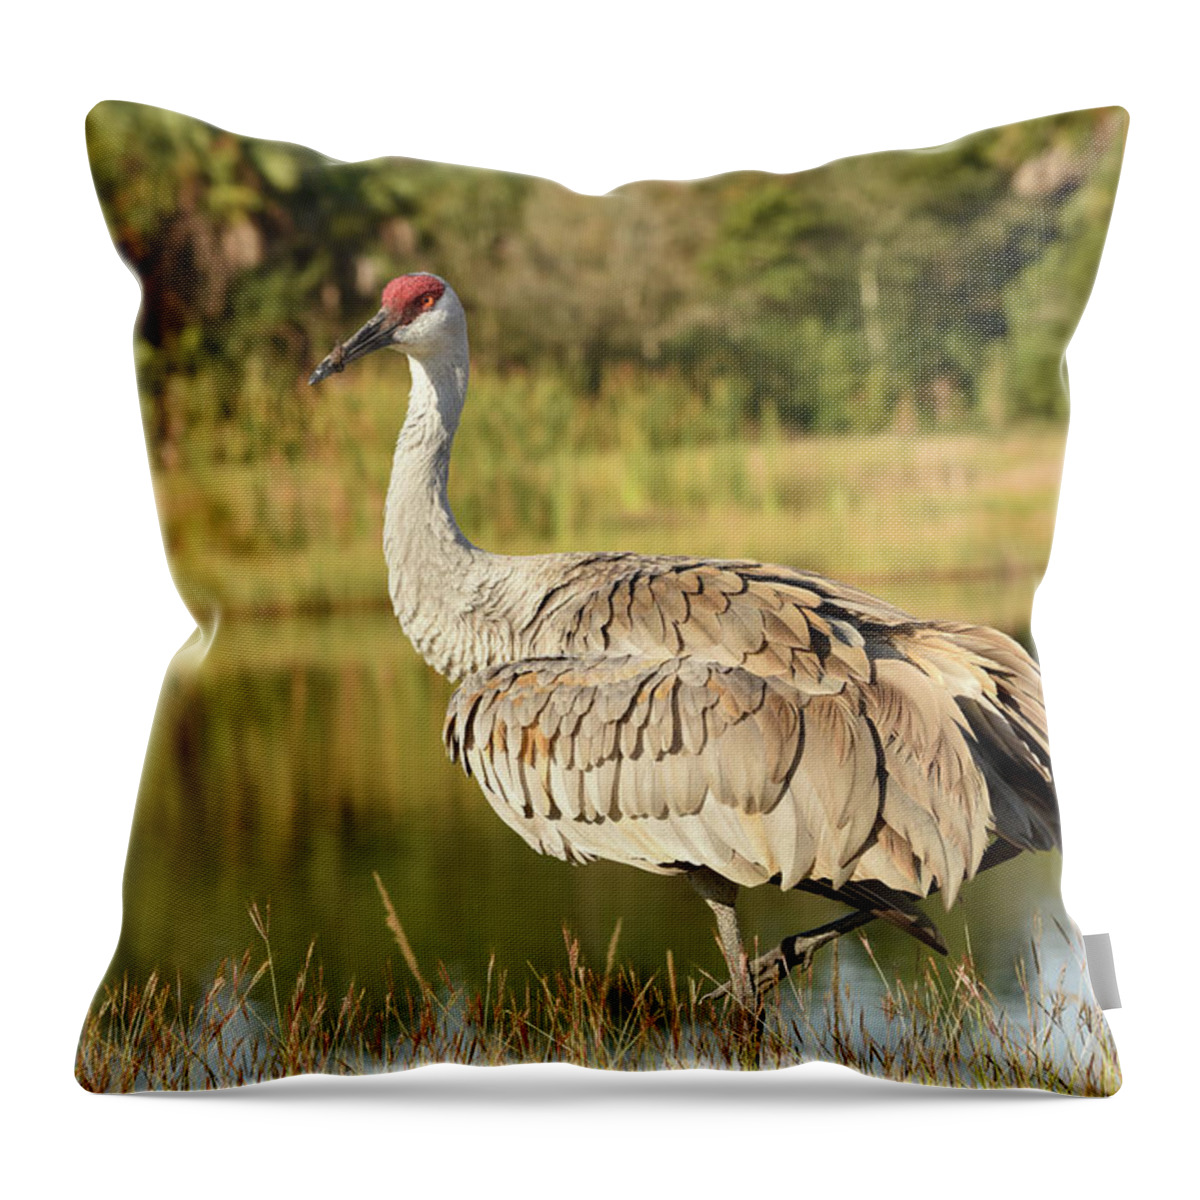 Crane Throw Pillow featuring the photograph Sandhill Crane Standing Beside a Lake by Artful Imagery